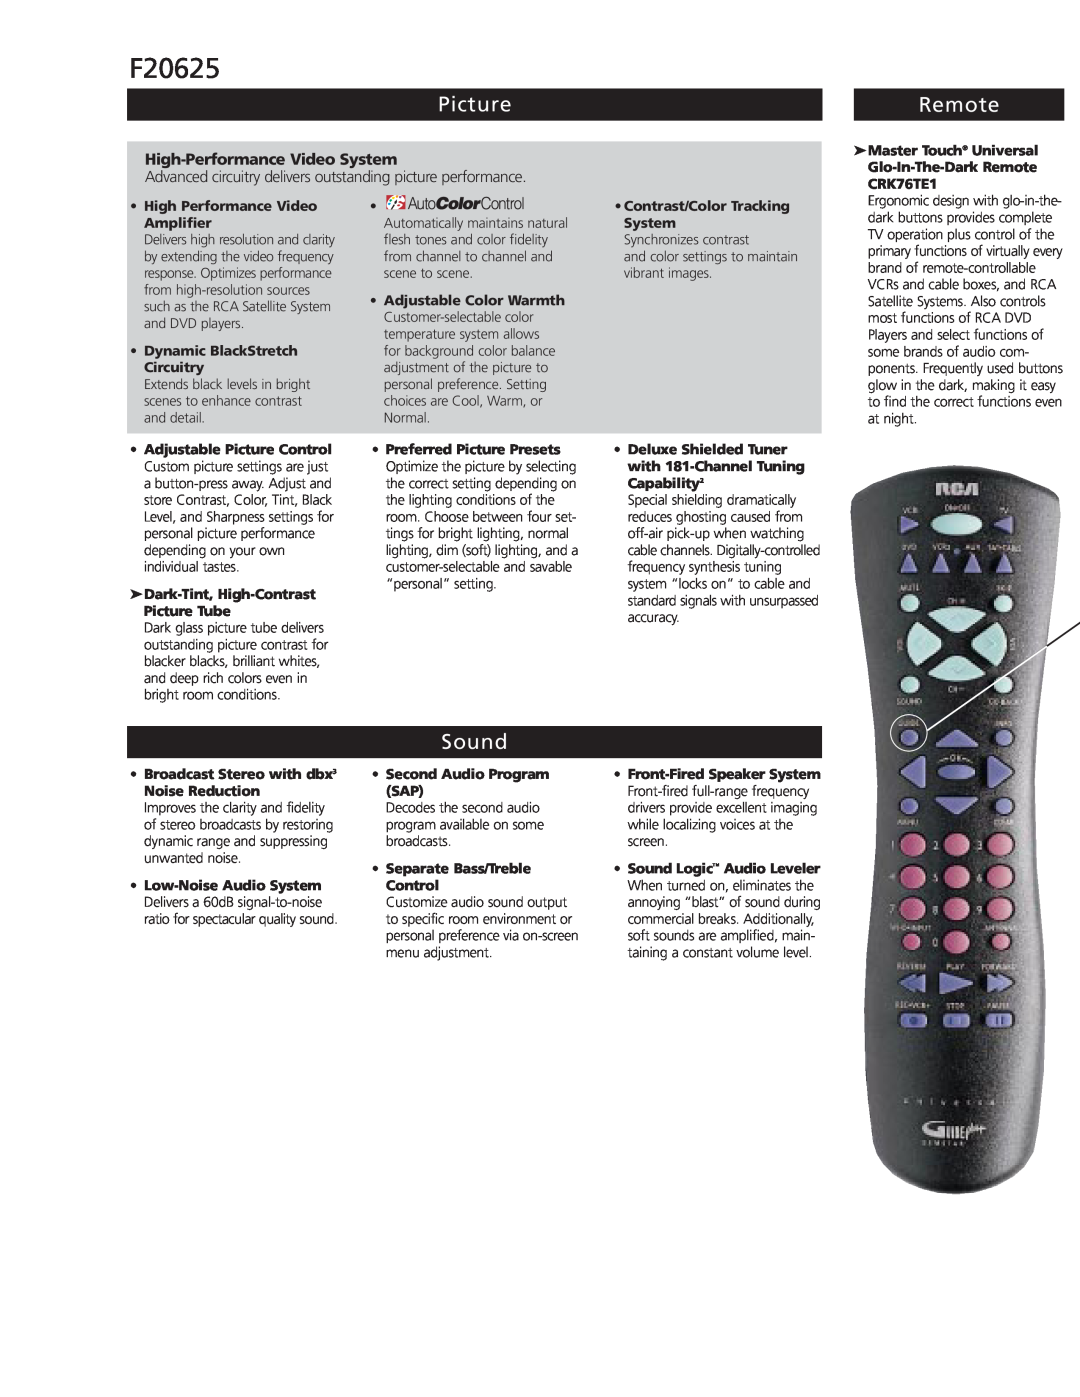 RCA F20625 manual Picture, Remote, Sound, High-Performance Video System 